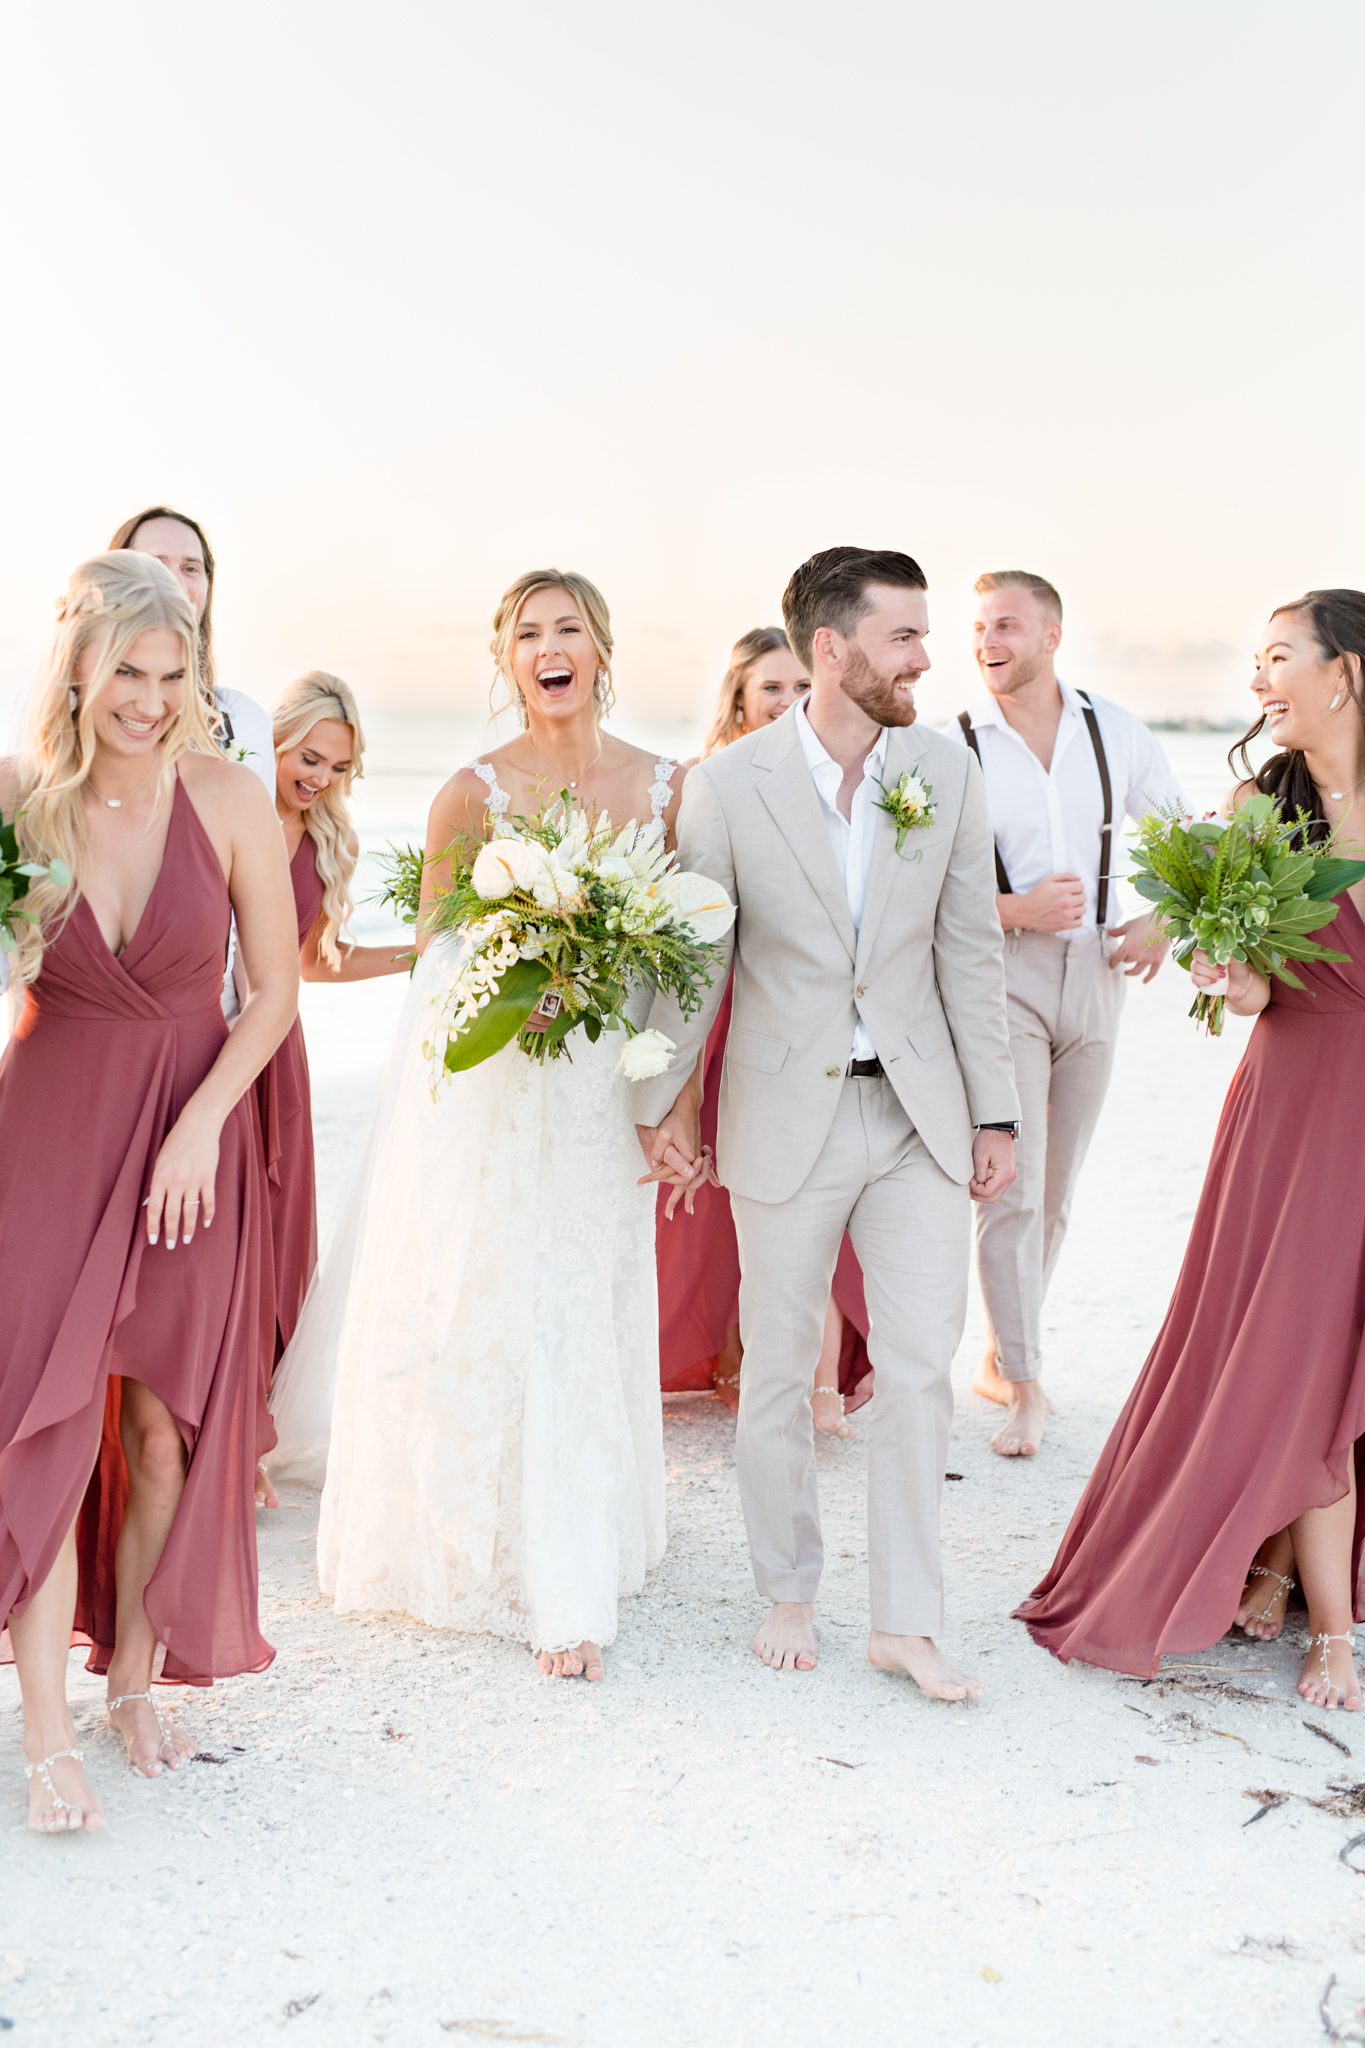 Wedding party laughs as they walk across the beach.